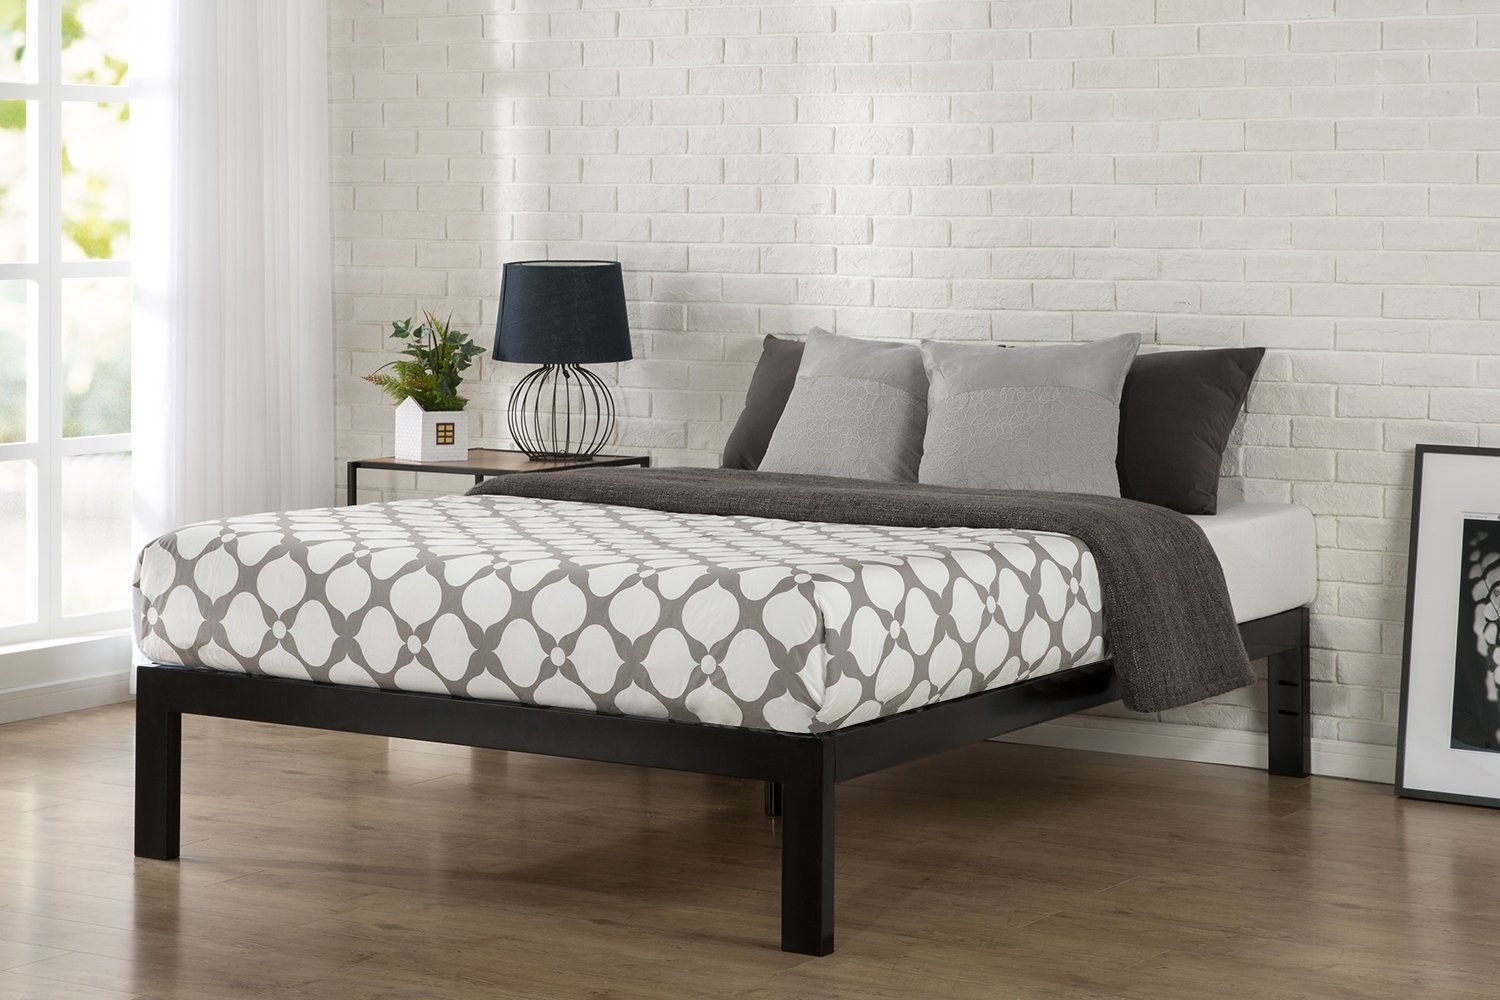 21 Bed Frames That Only Look, Queen Bed Frame Black Friday Deals 2018